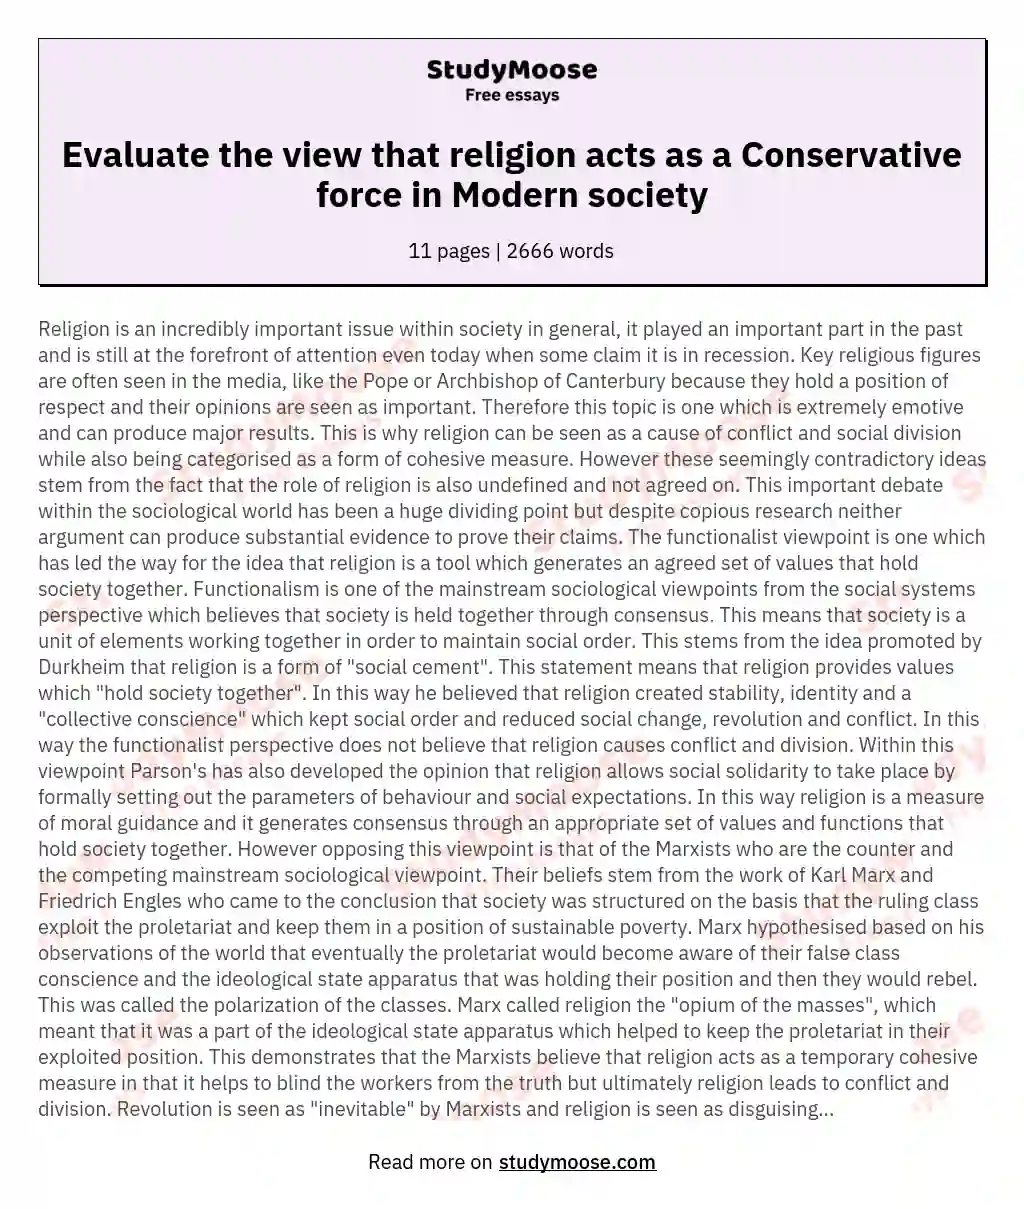 Evaluate the view that religion acts as a Conservative force in Modern society essay